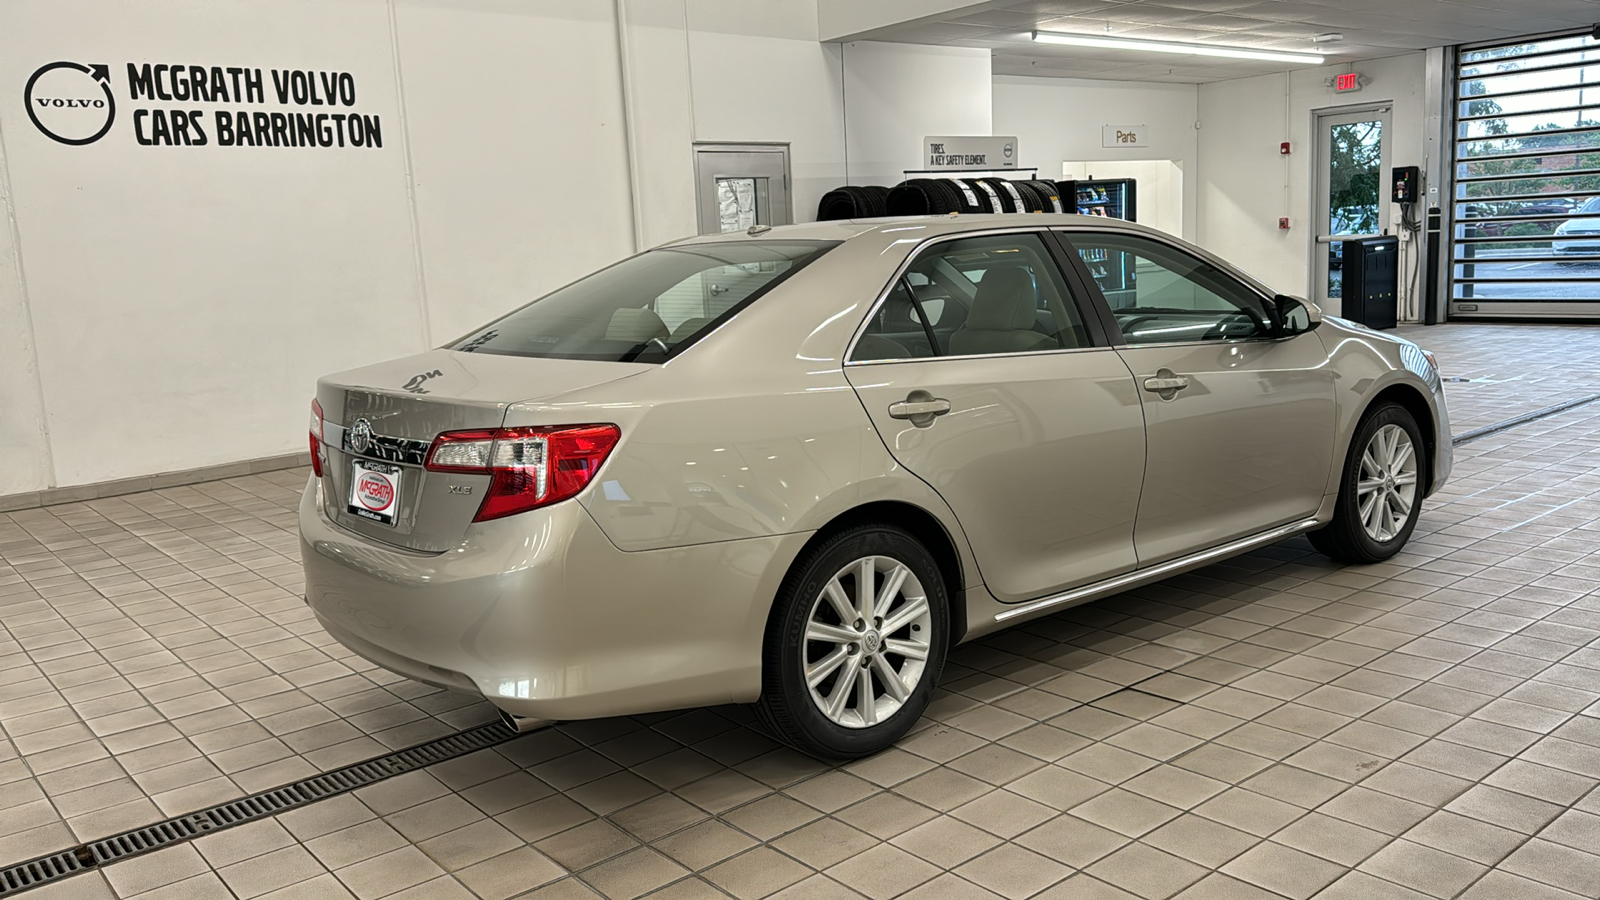 2014 Toyota Camry XLE 5